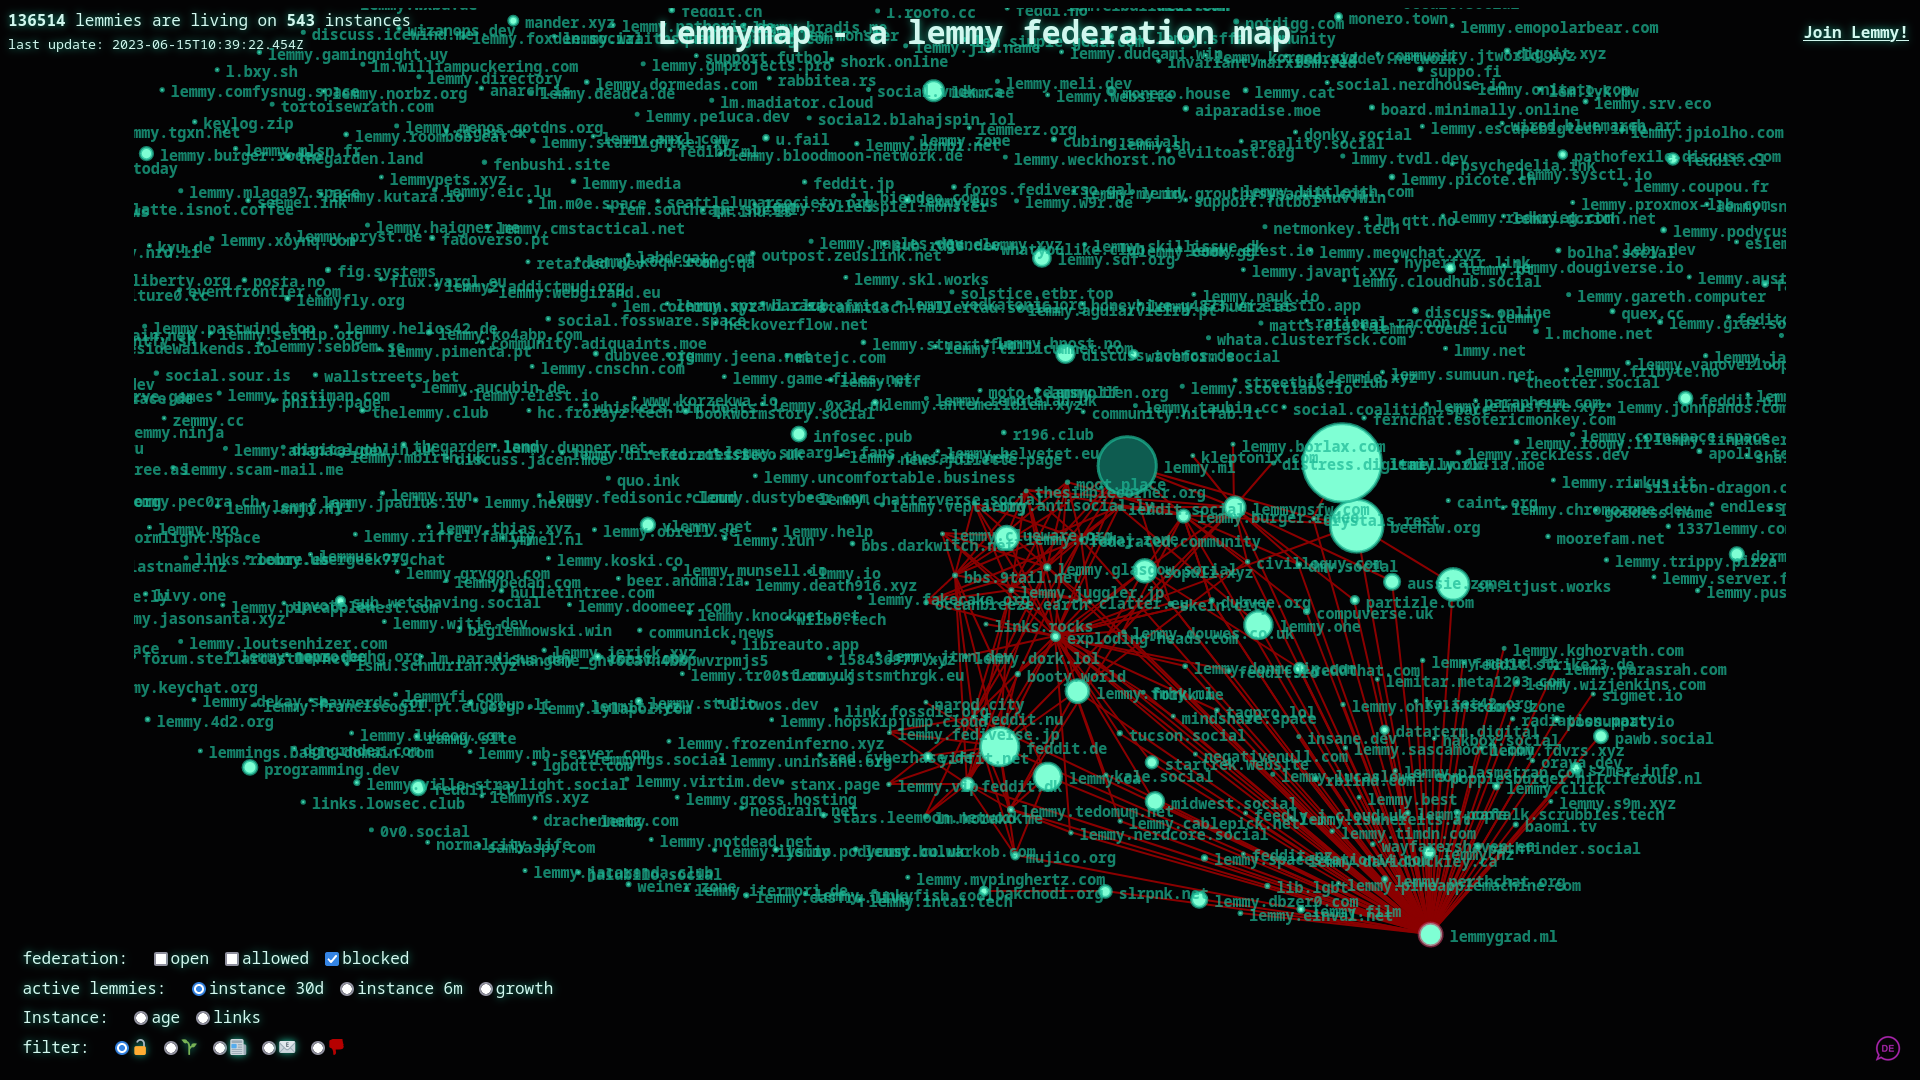 A map of instance blocks, in red, versus instance links, in white. Lemmygrad.ml has by far the most red lines indicating that it has been blocked by other instances the most